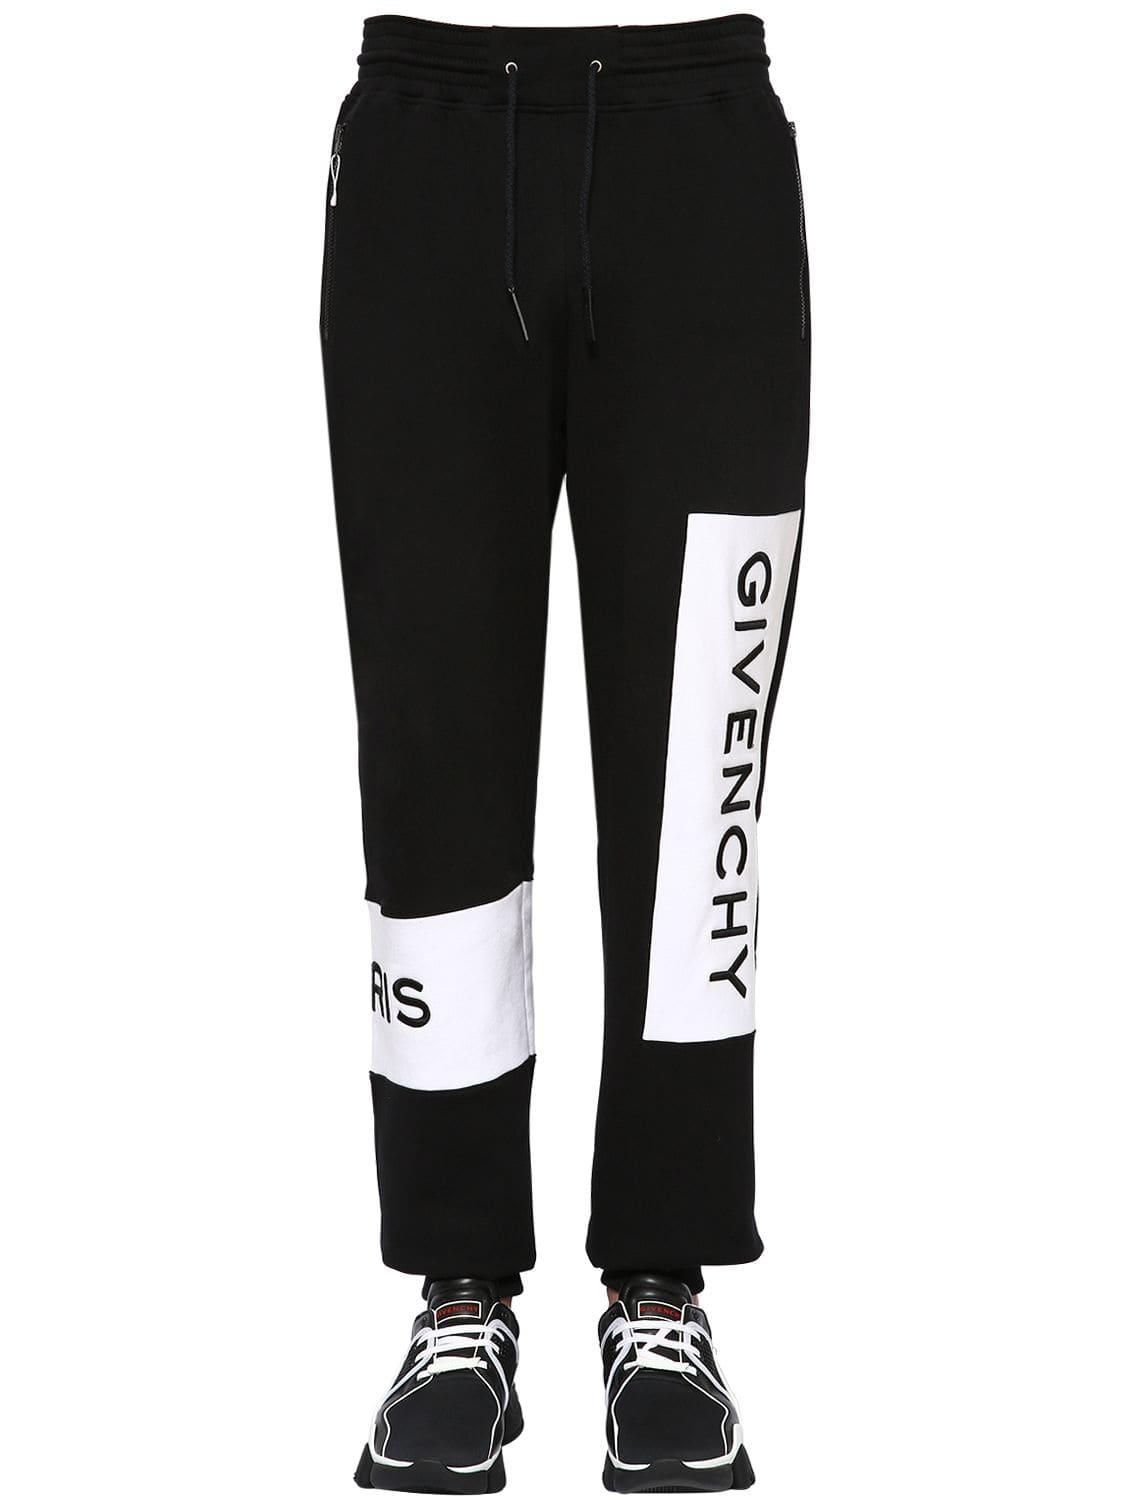 experience anywhere Wetland givenchy tracksuit bottoms mens